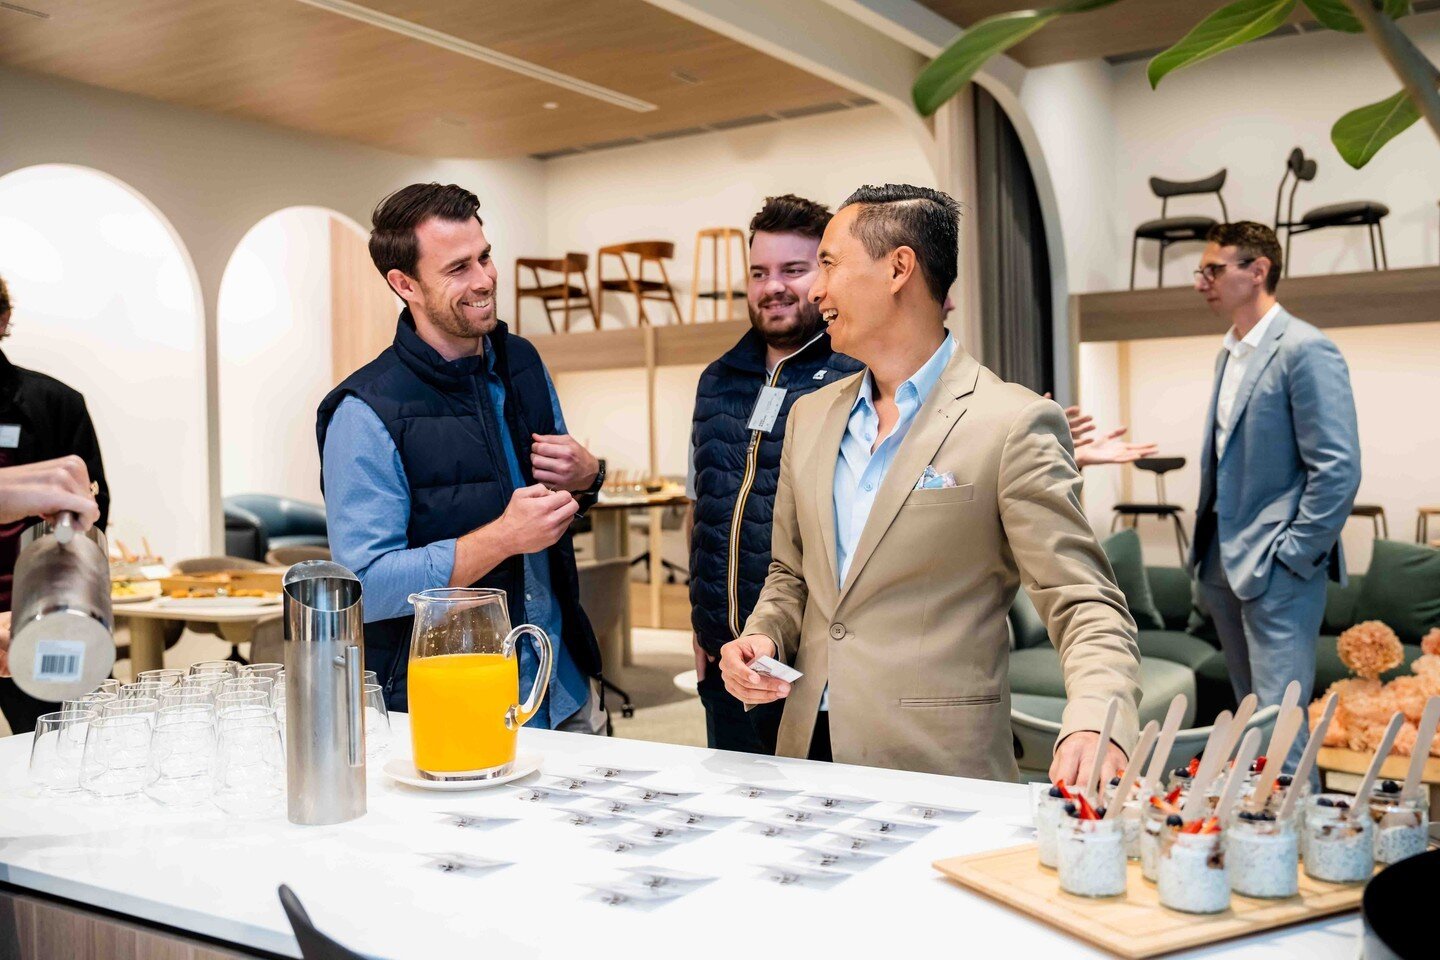 🙌 Networking in style! 

Last week, we braved the weather and were warmly #welcomed to the @castledex_ showroom for a fantastic morning of catching up and #networking with the @premierbusinessnetwork community.

During the event, #Director James Tur